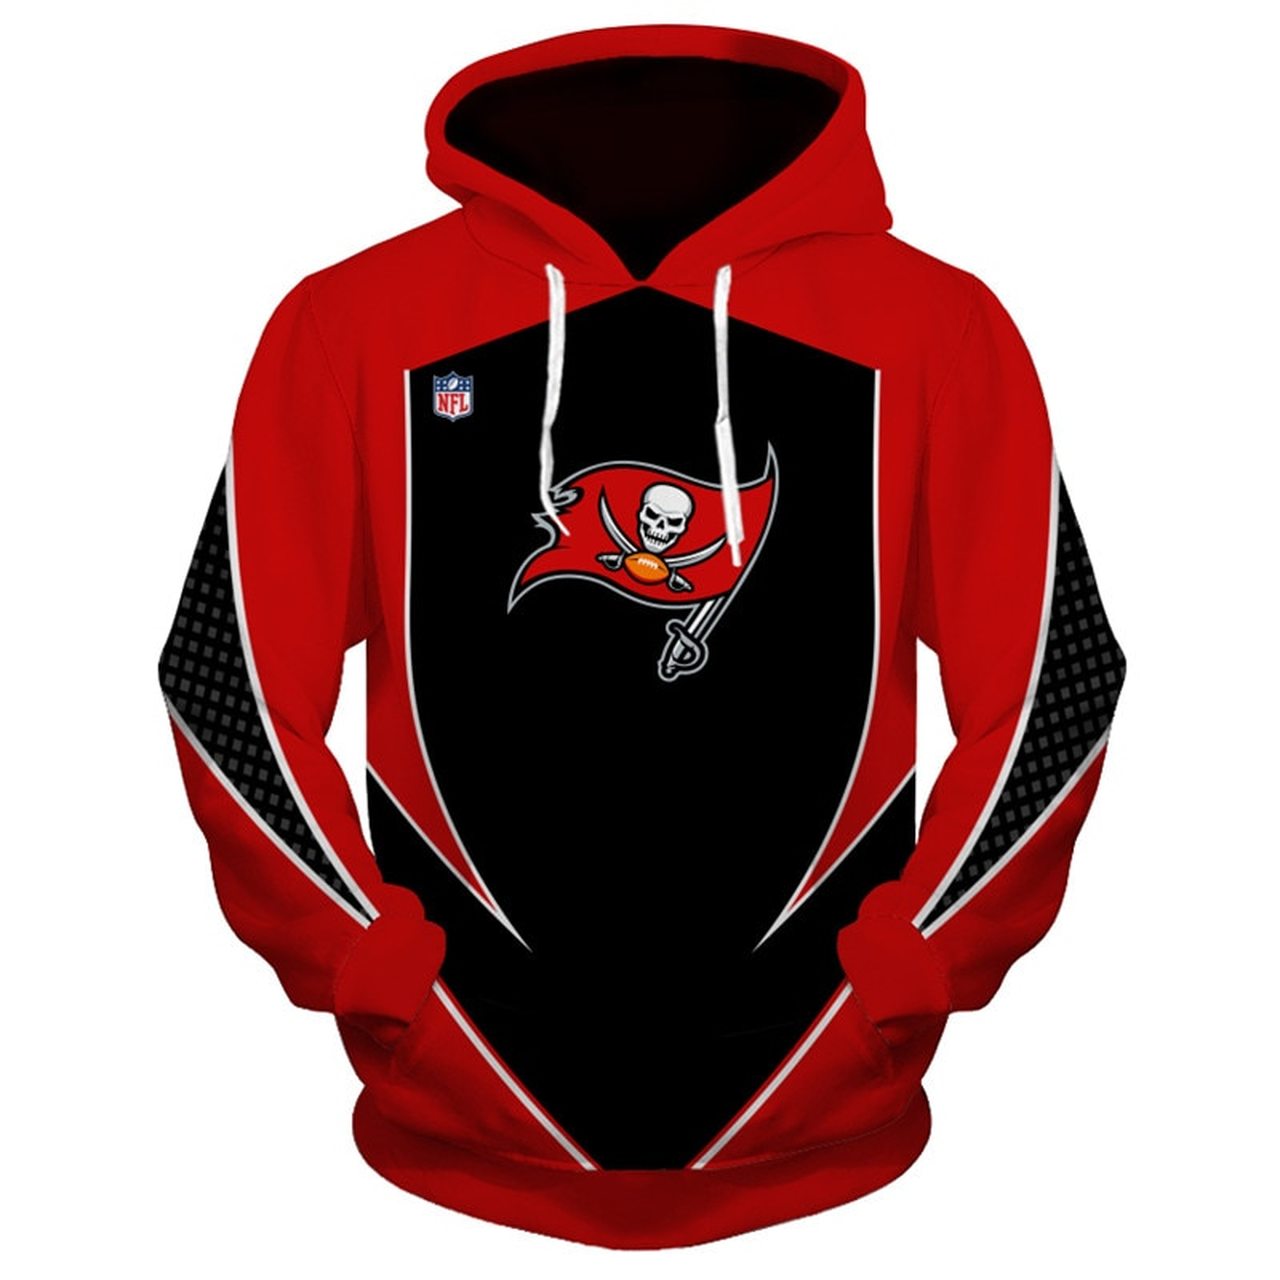 Great Tampa Bay Buccaneers 3D Hoodie For Awesome Fans - HomeFavo